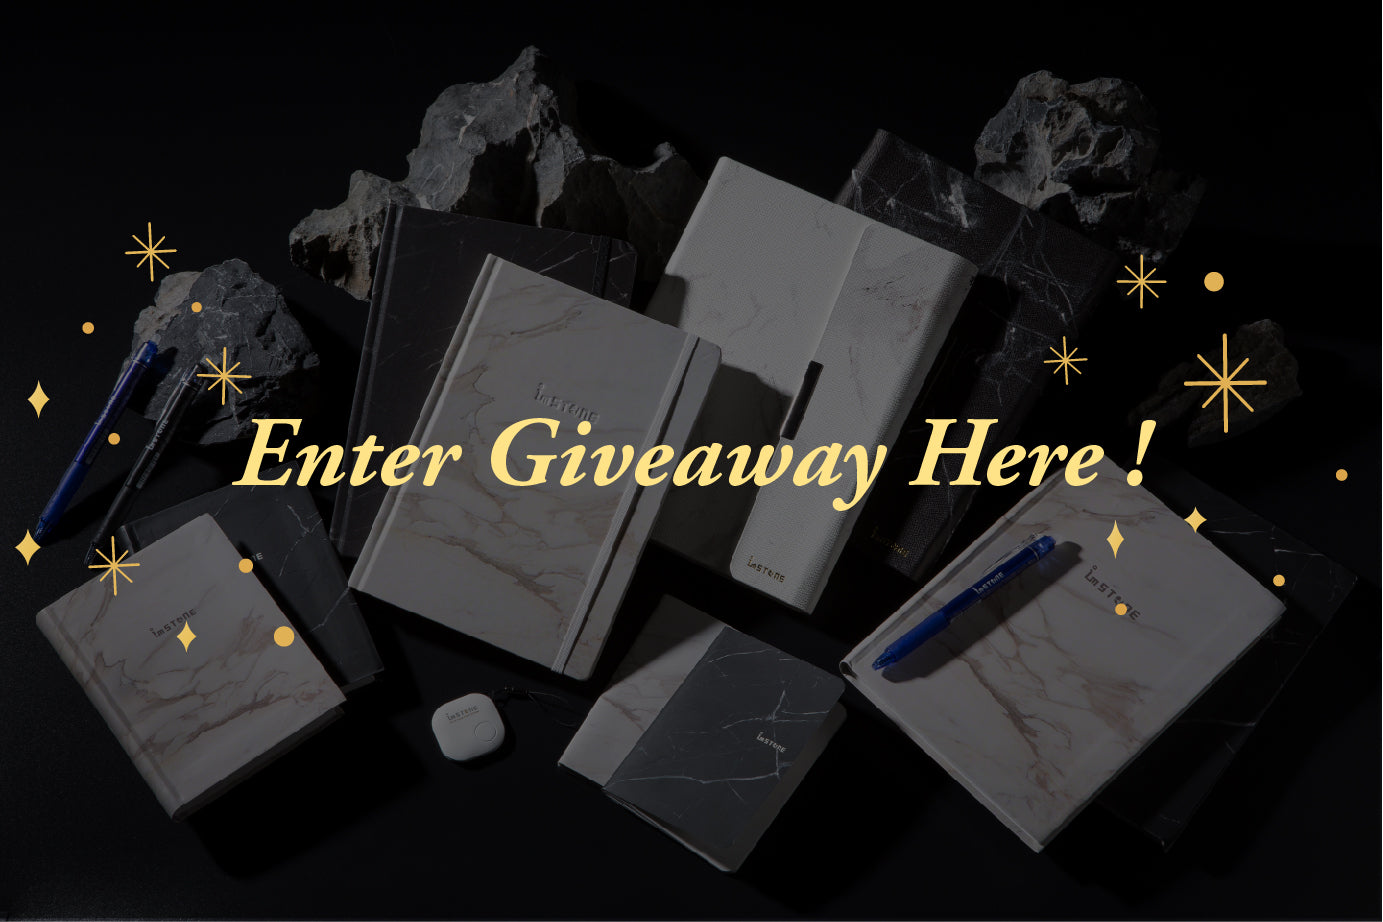 Enter Giveaway HERE!